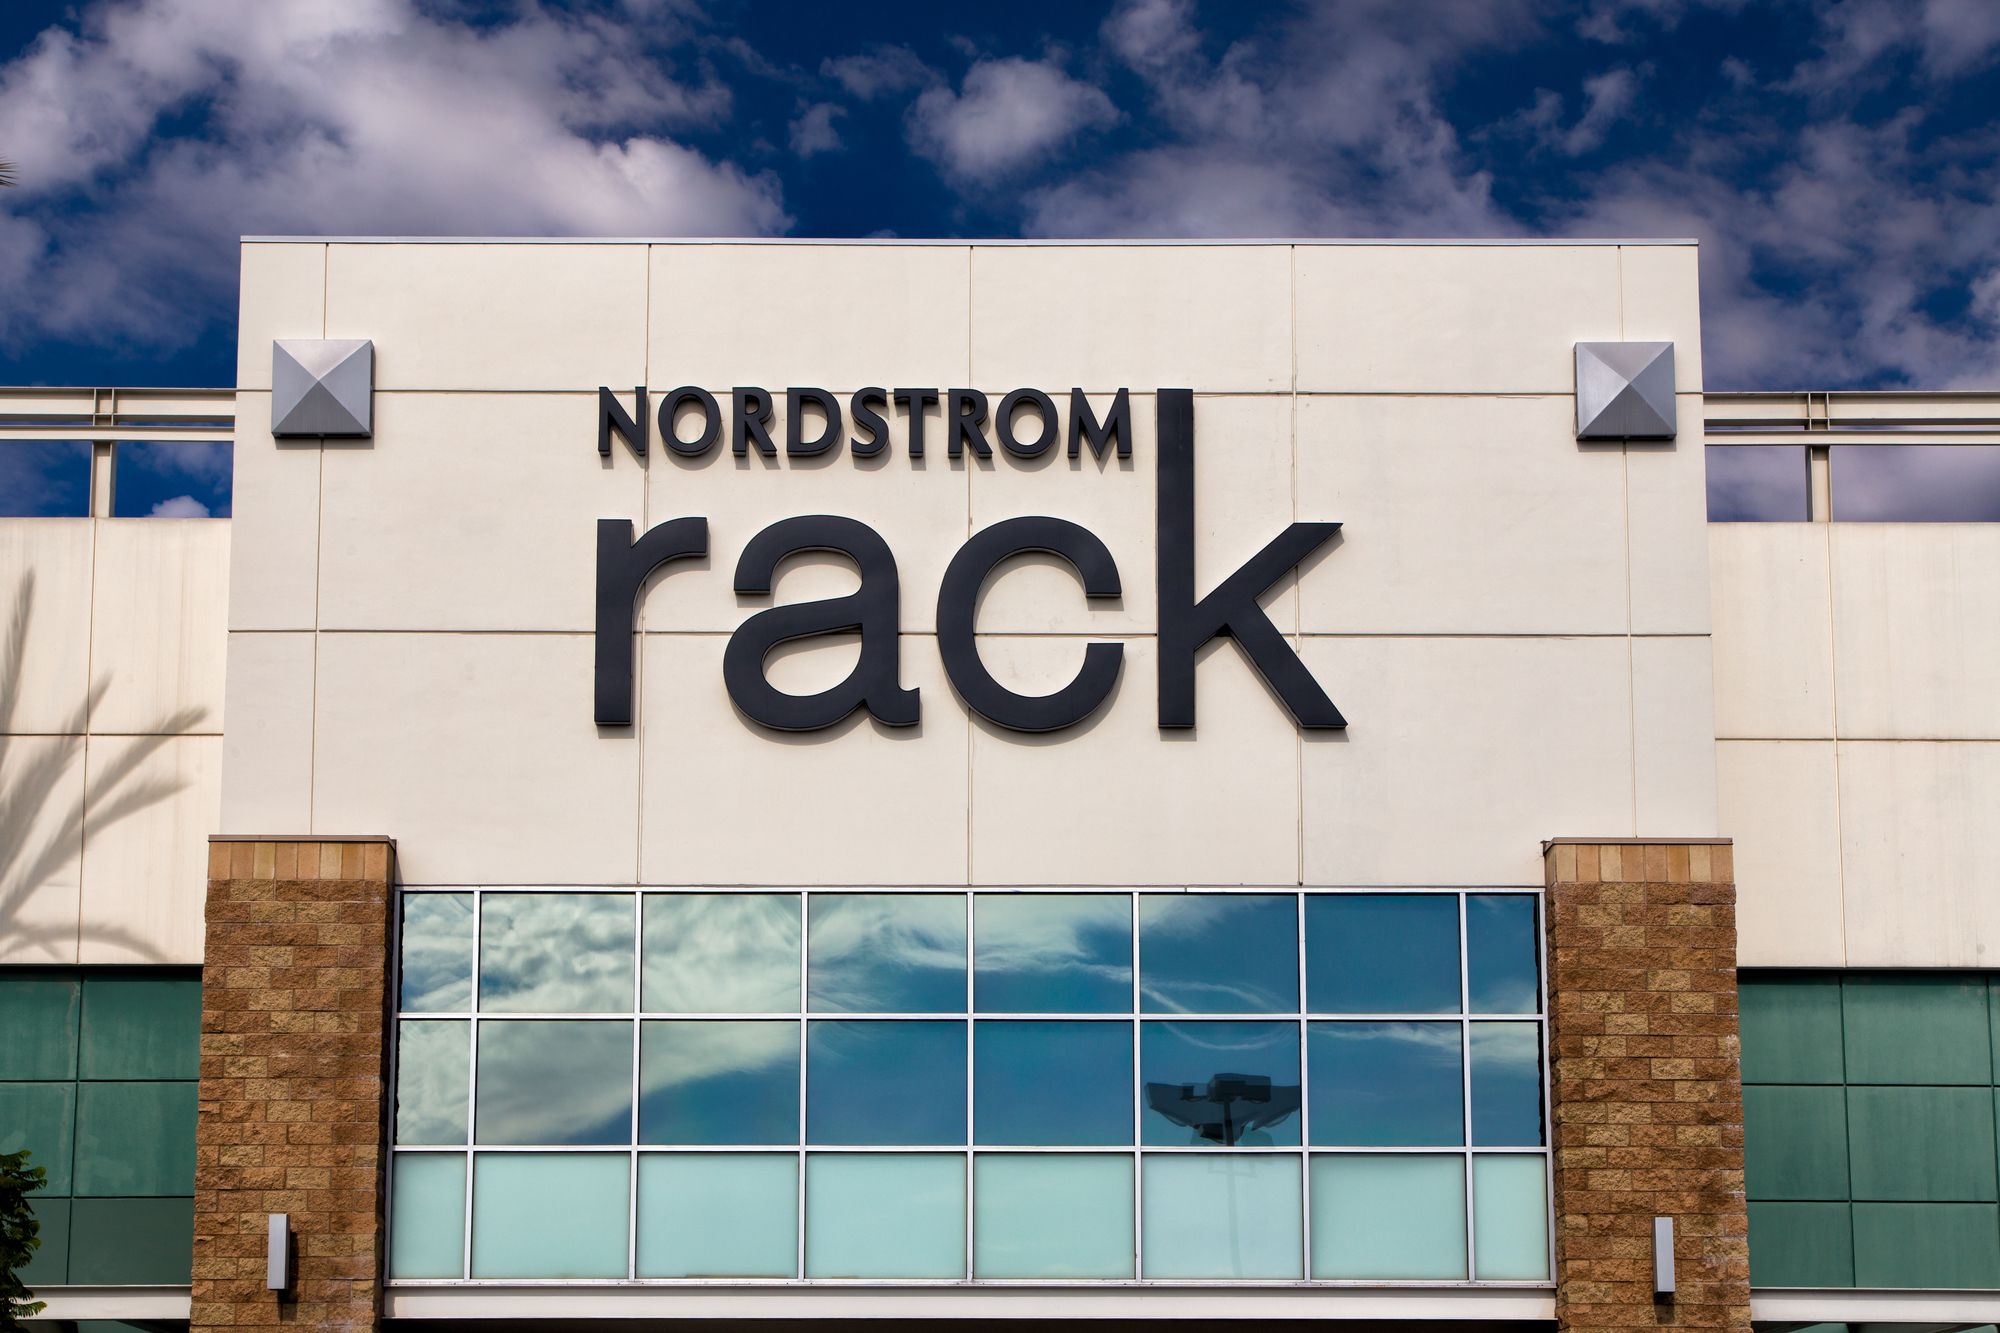 Nordstrom overcharged customers